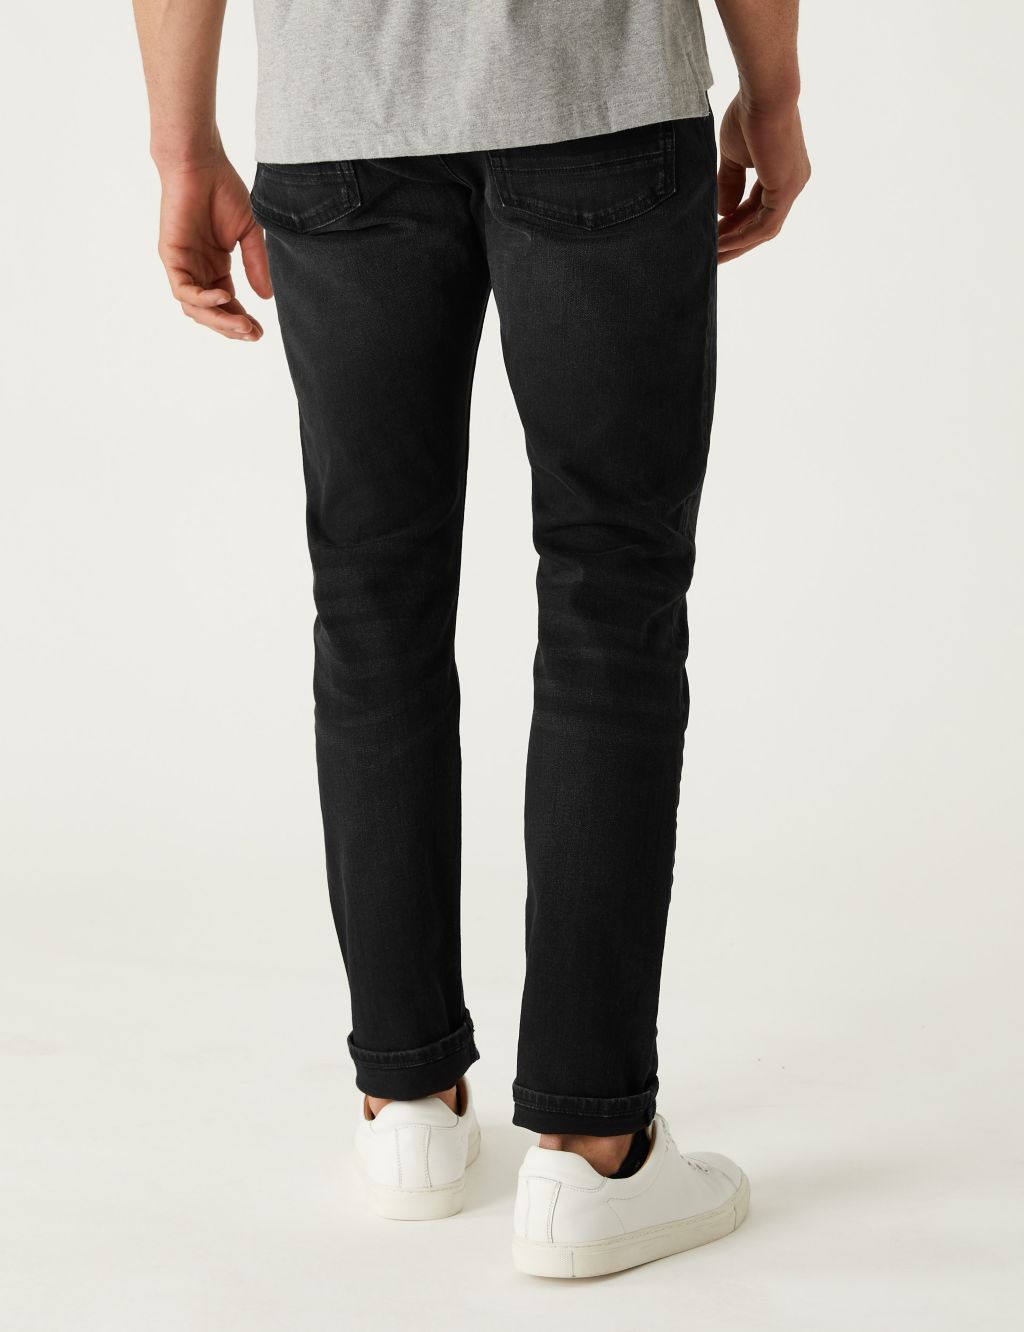 Slim Fit Belted Stretch Jeans image 3